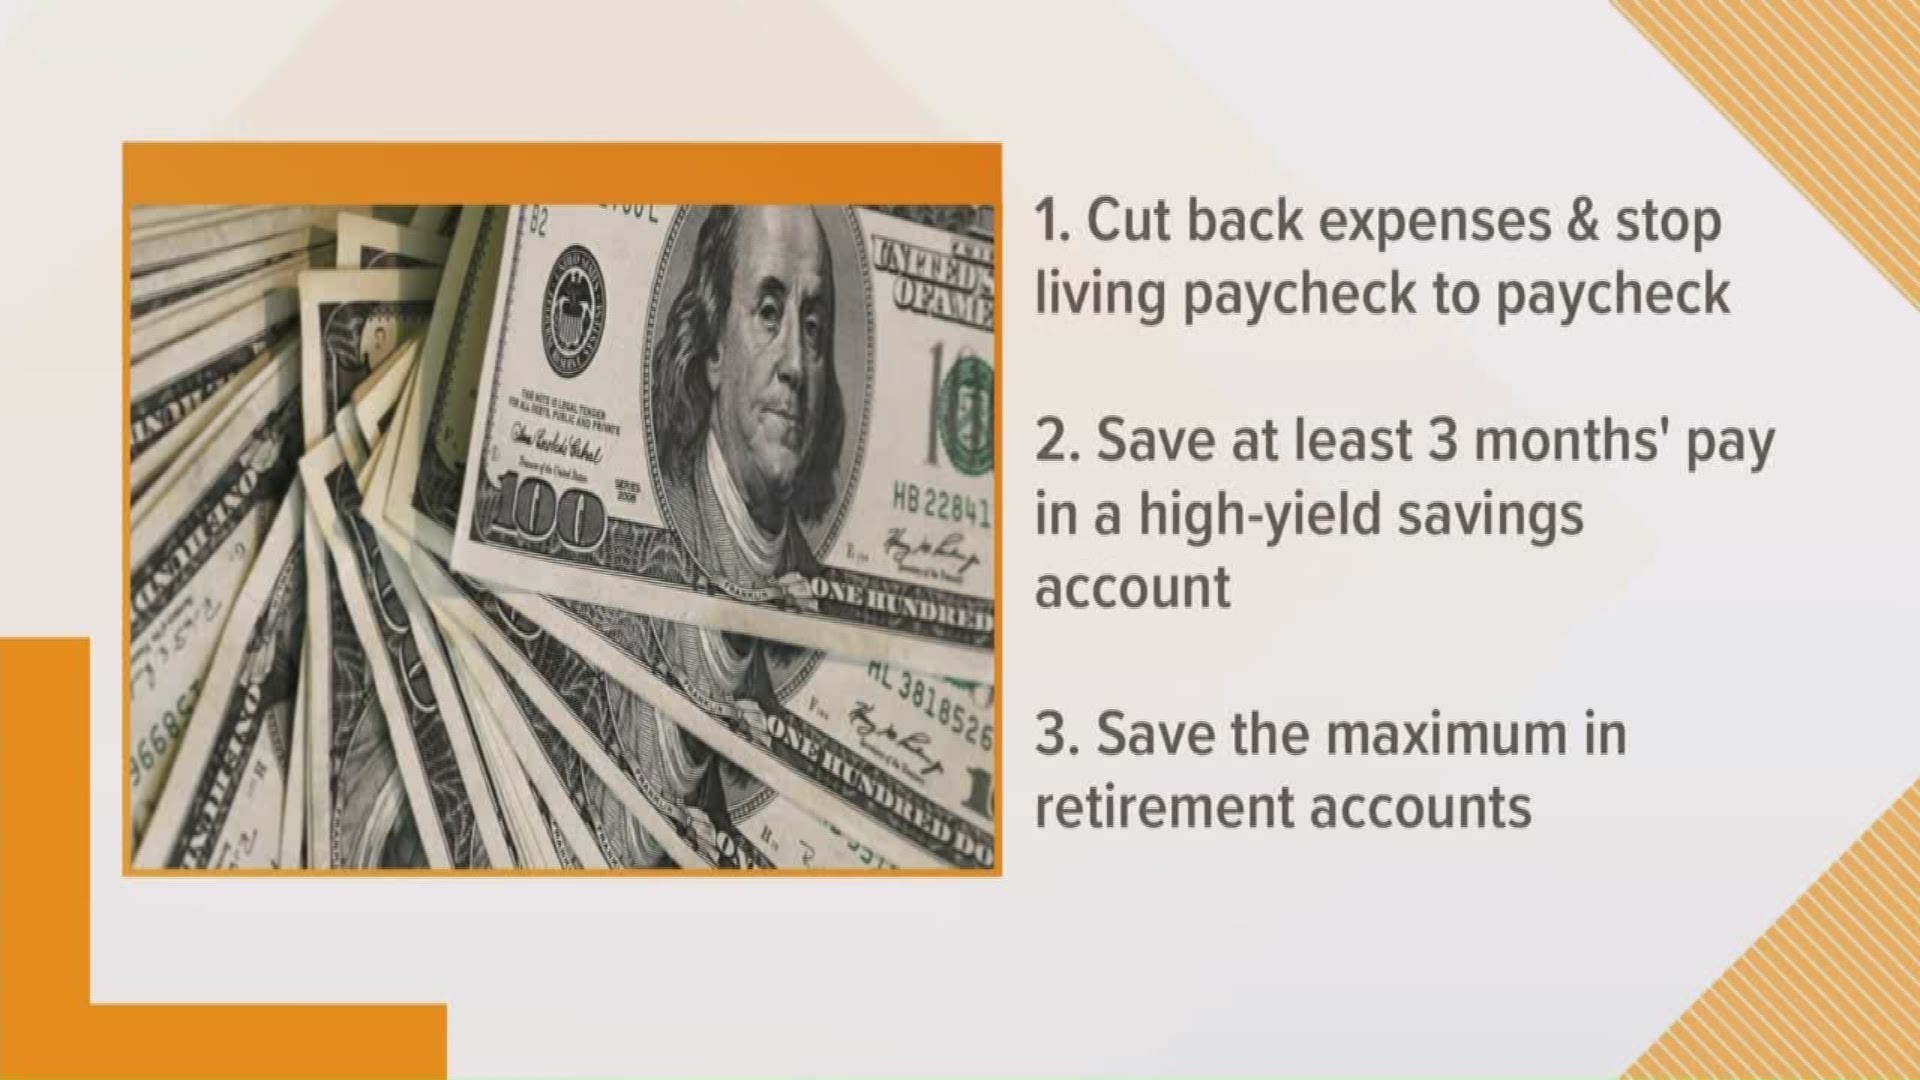 Financial Expert Randy Waesche is helping to build up the millennial's finances by giving them some simple yet life-changing tips.